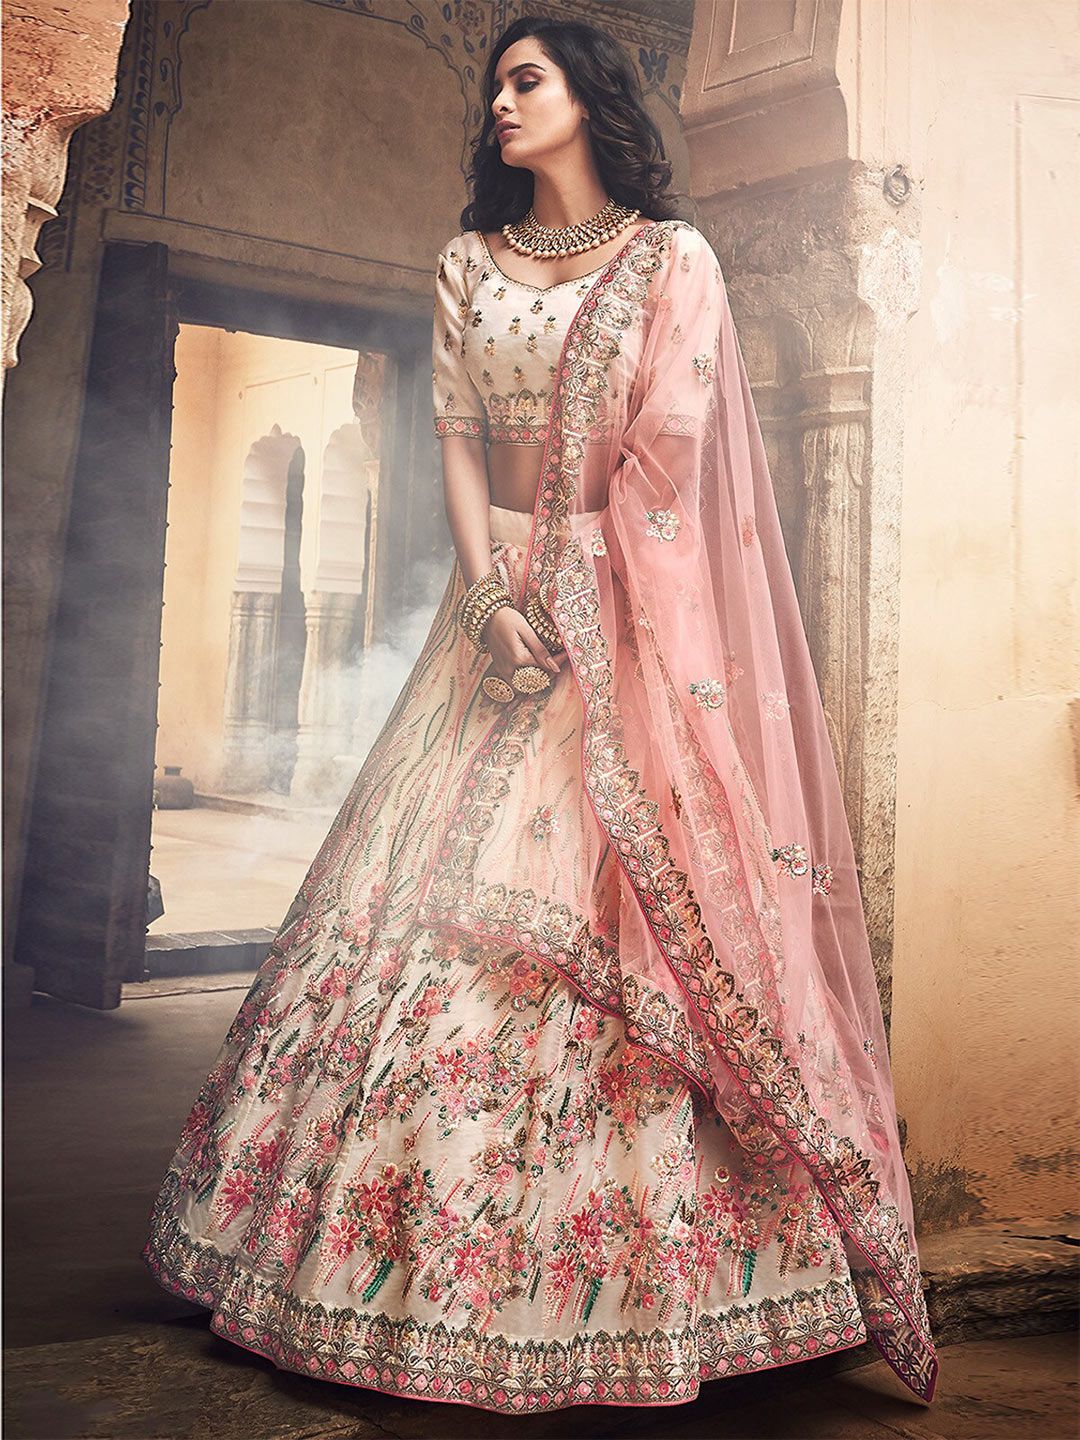 ODETTE Organza Embroidered Semi-Stitched Lehenga & Unstitched Blouse With Dupatta Price in India